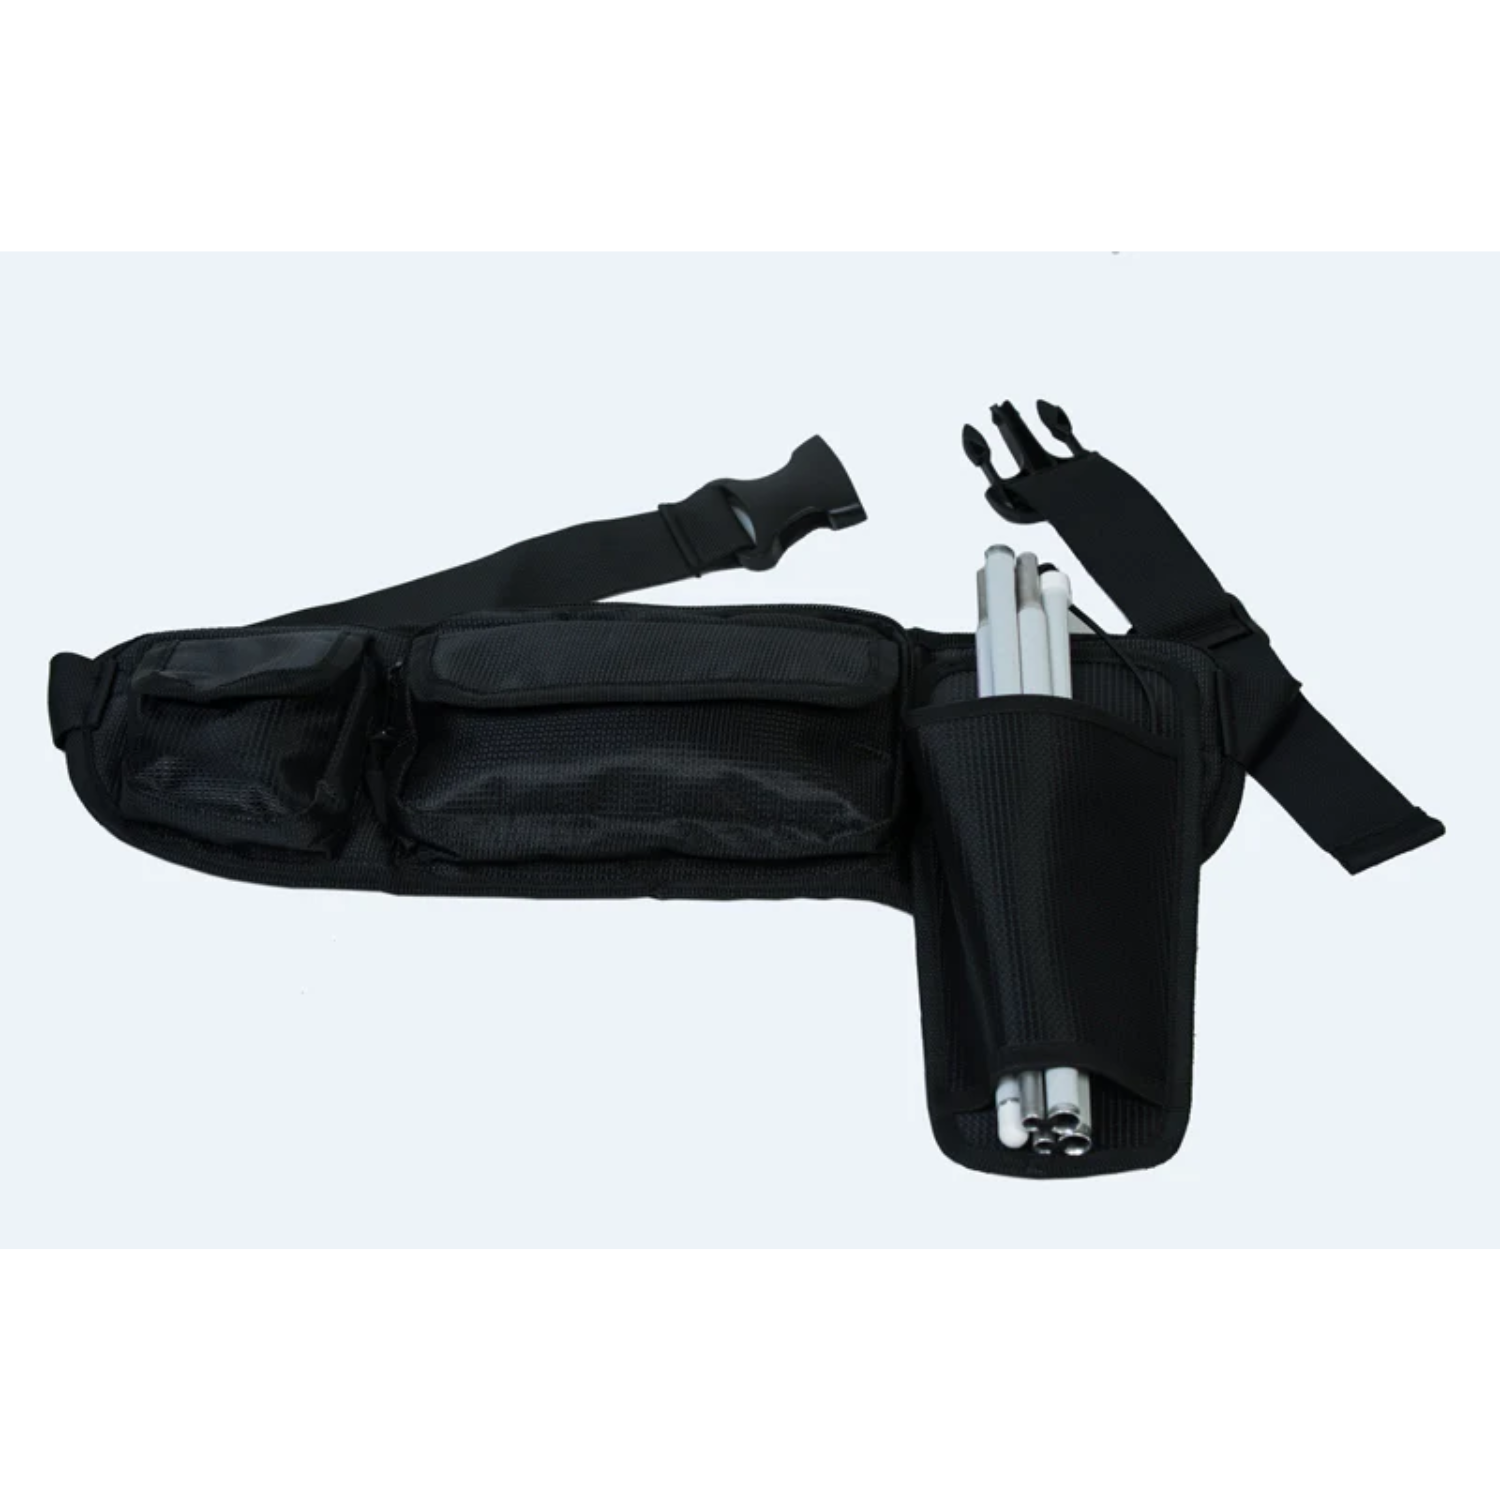 Image of a black mobility cane holster with a belt from Ambutech